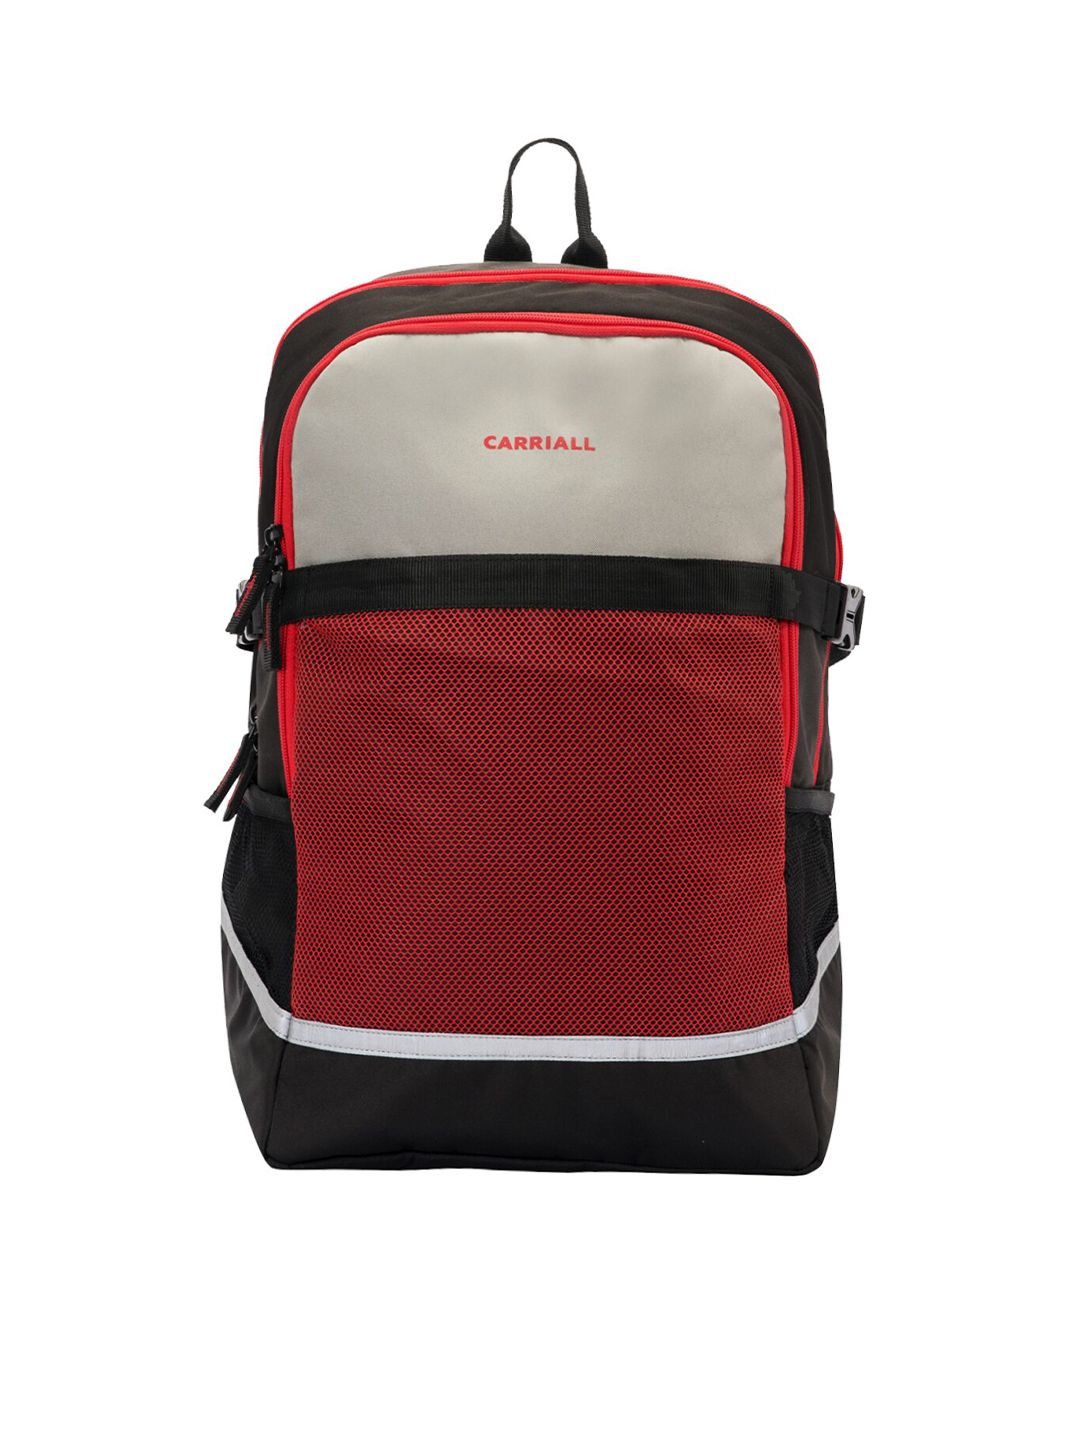 CARRIALL Unisex Red Colourblocked Active Sports Backpack Price in India